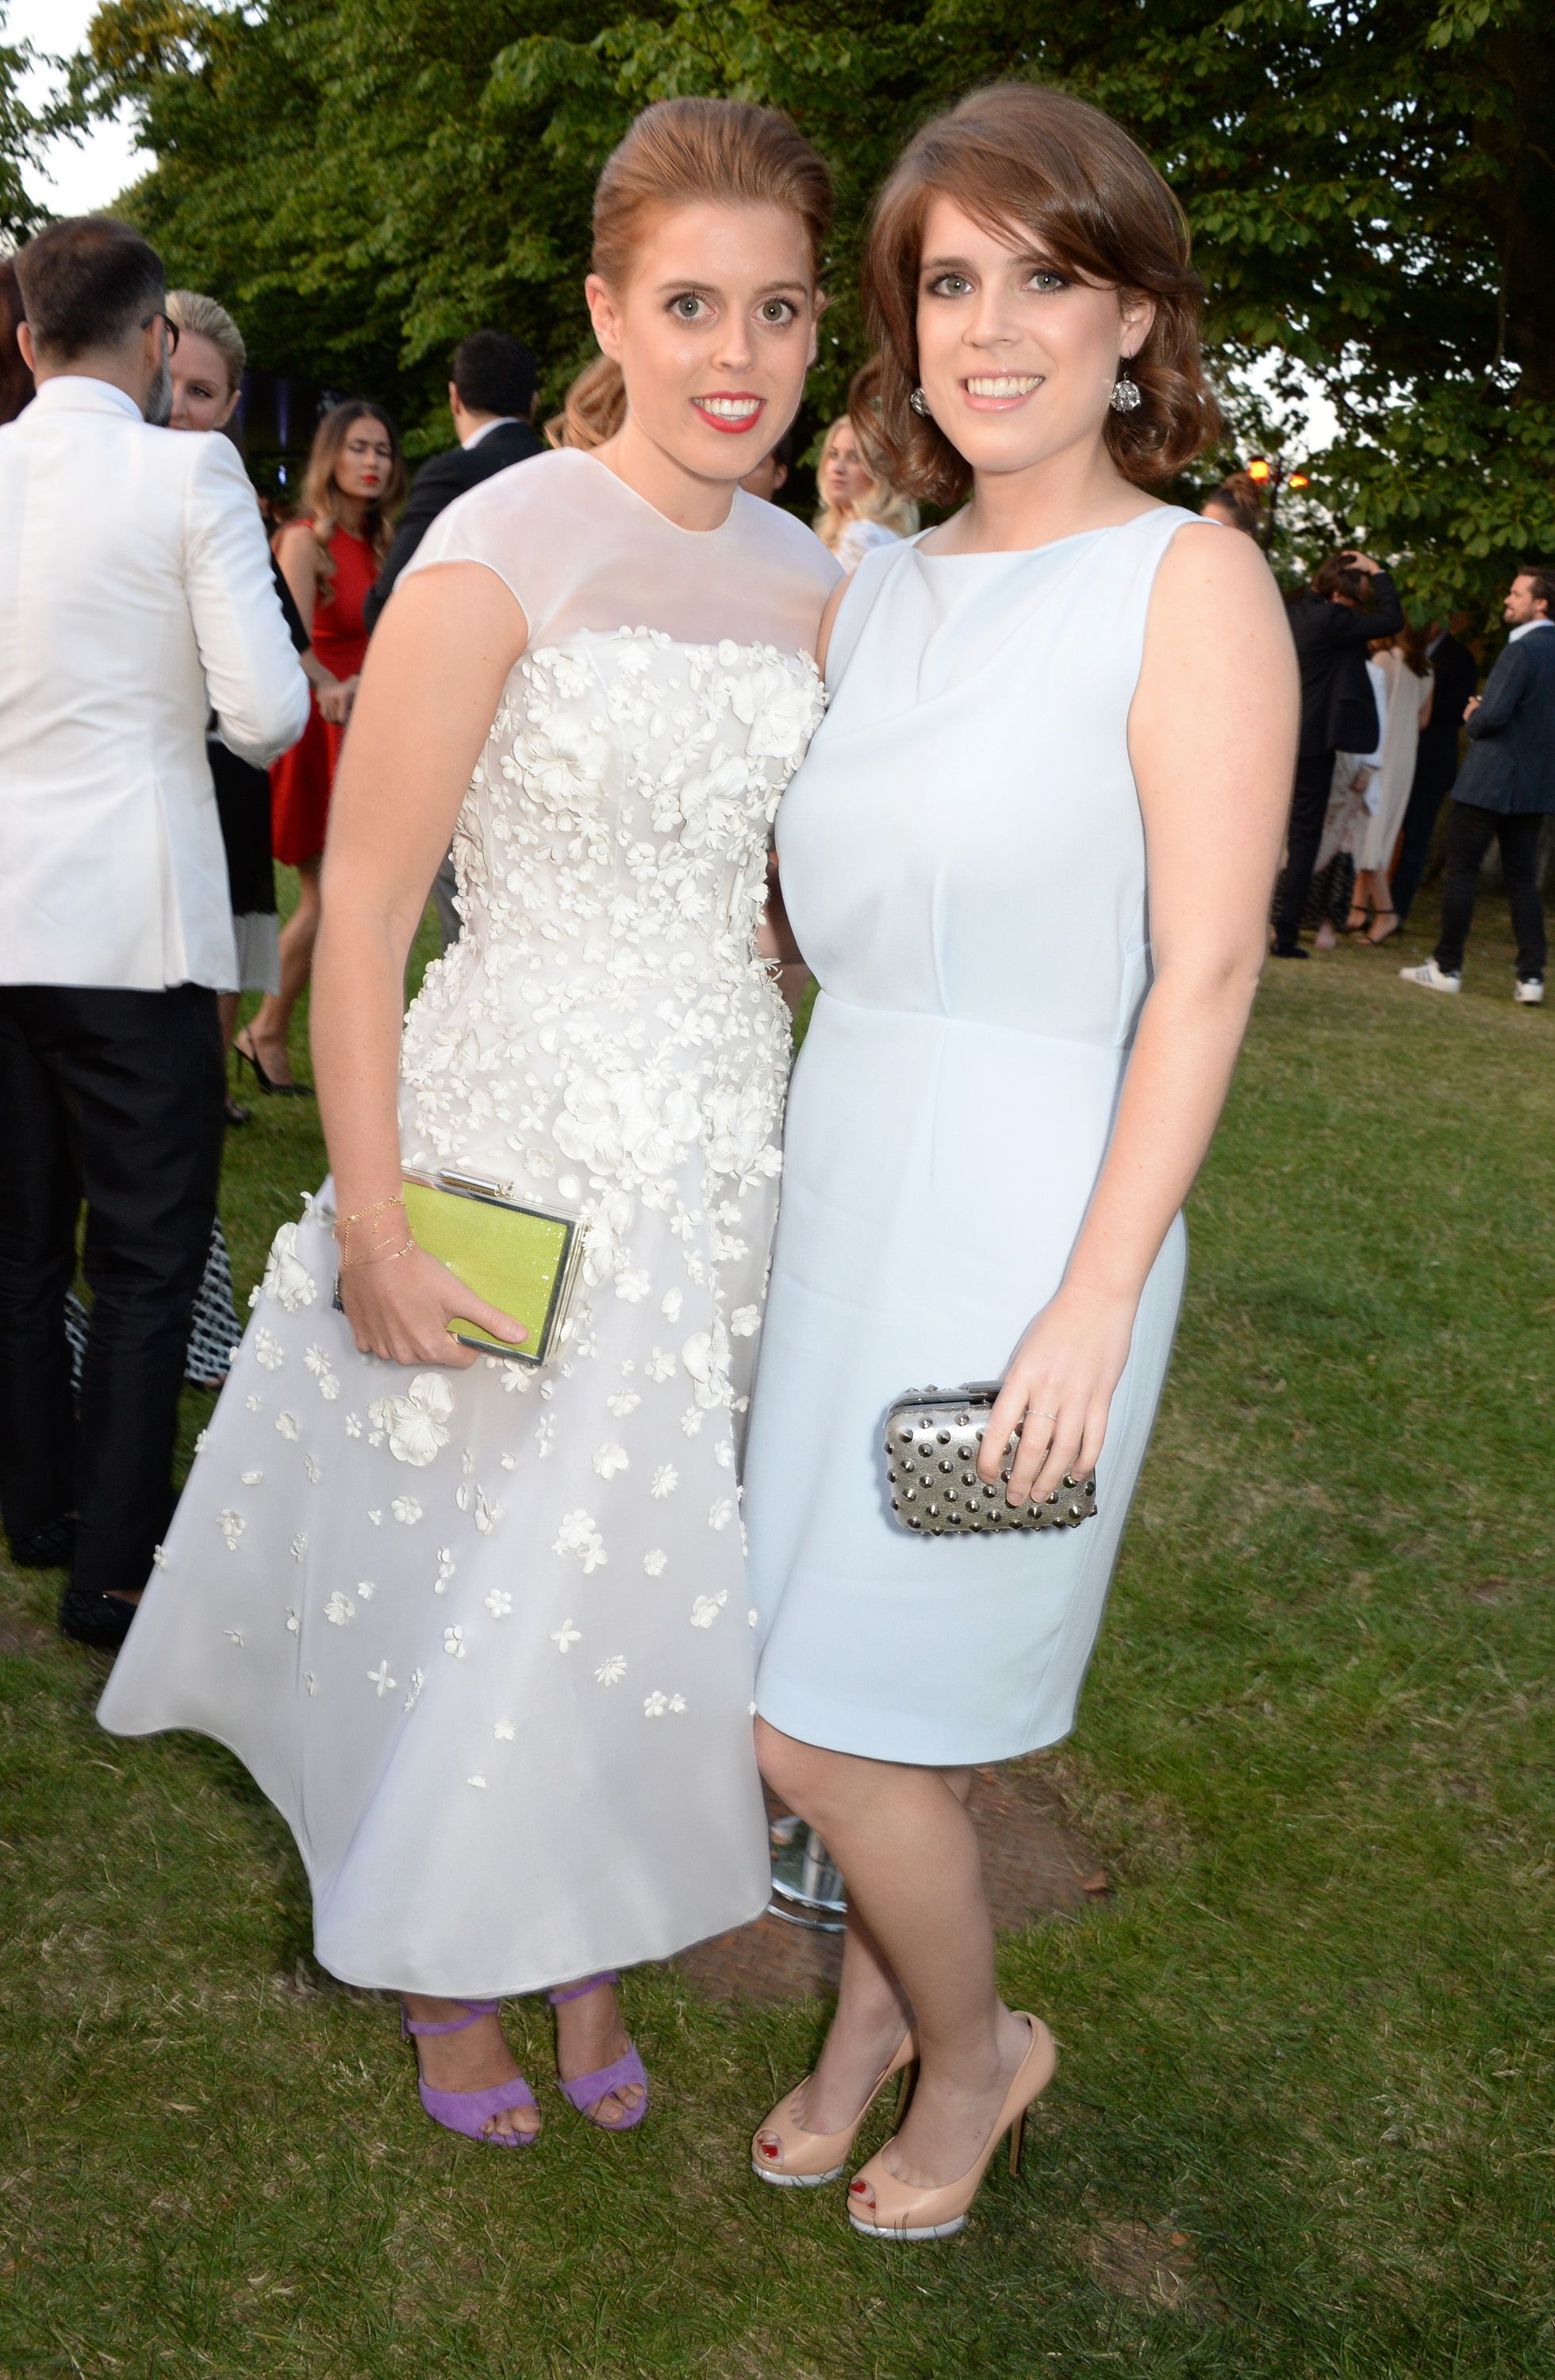 Princess Beatrice and Princess Eugenie of York during The Serpentine Gallery Summer Party co-hosted by Brioni at The Serpentine Gallery on July 1, 2014 in London, England. | Source: Getty Images